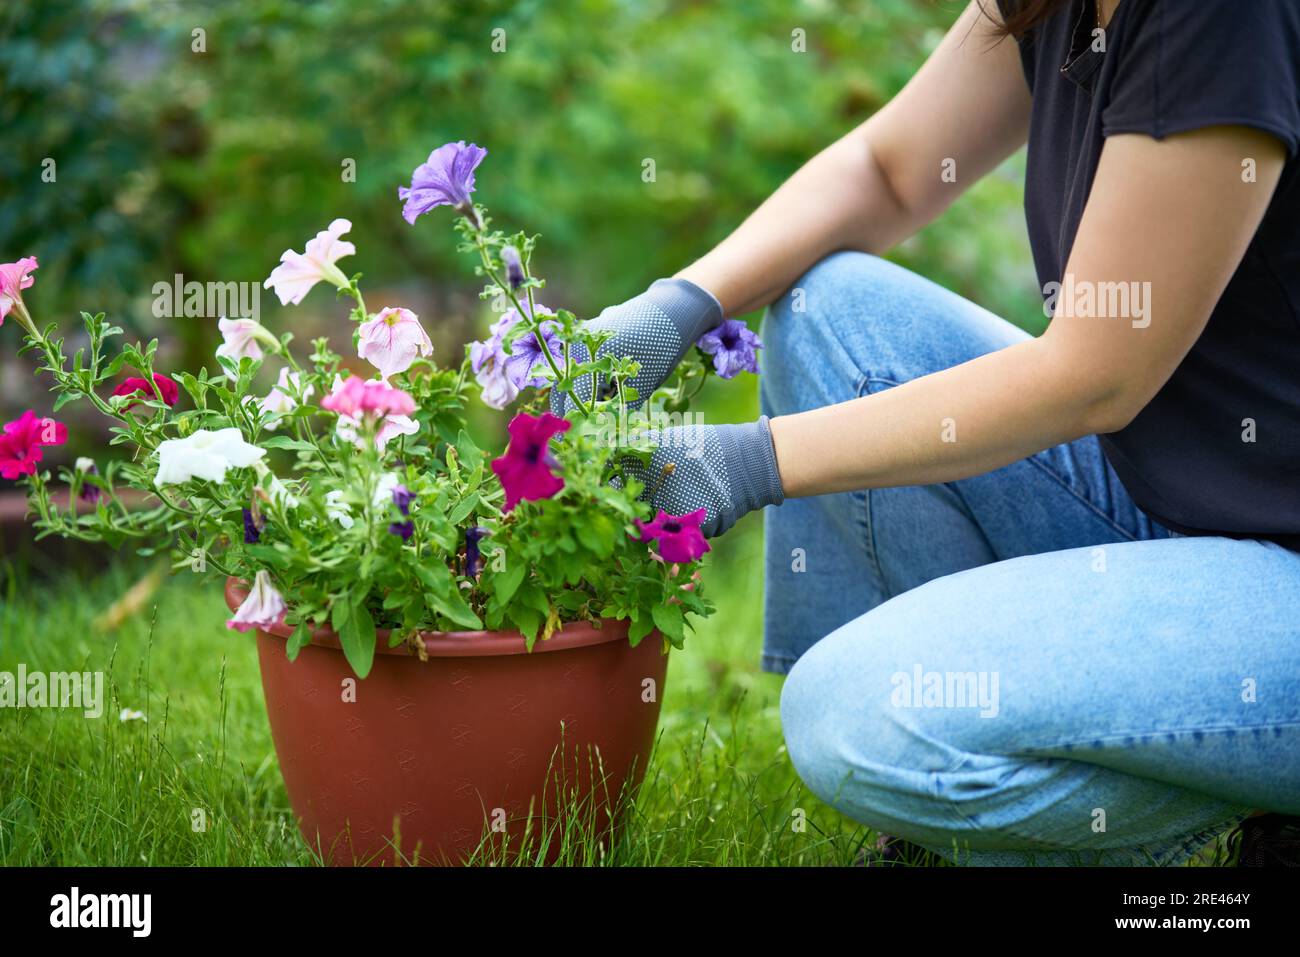 Cropped image of woman planting flowers in the garden, close up photo. Gardening and floriculture. Flower care concept Stock Photo